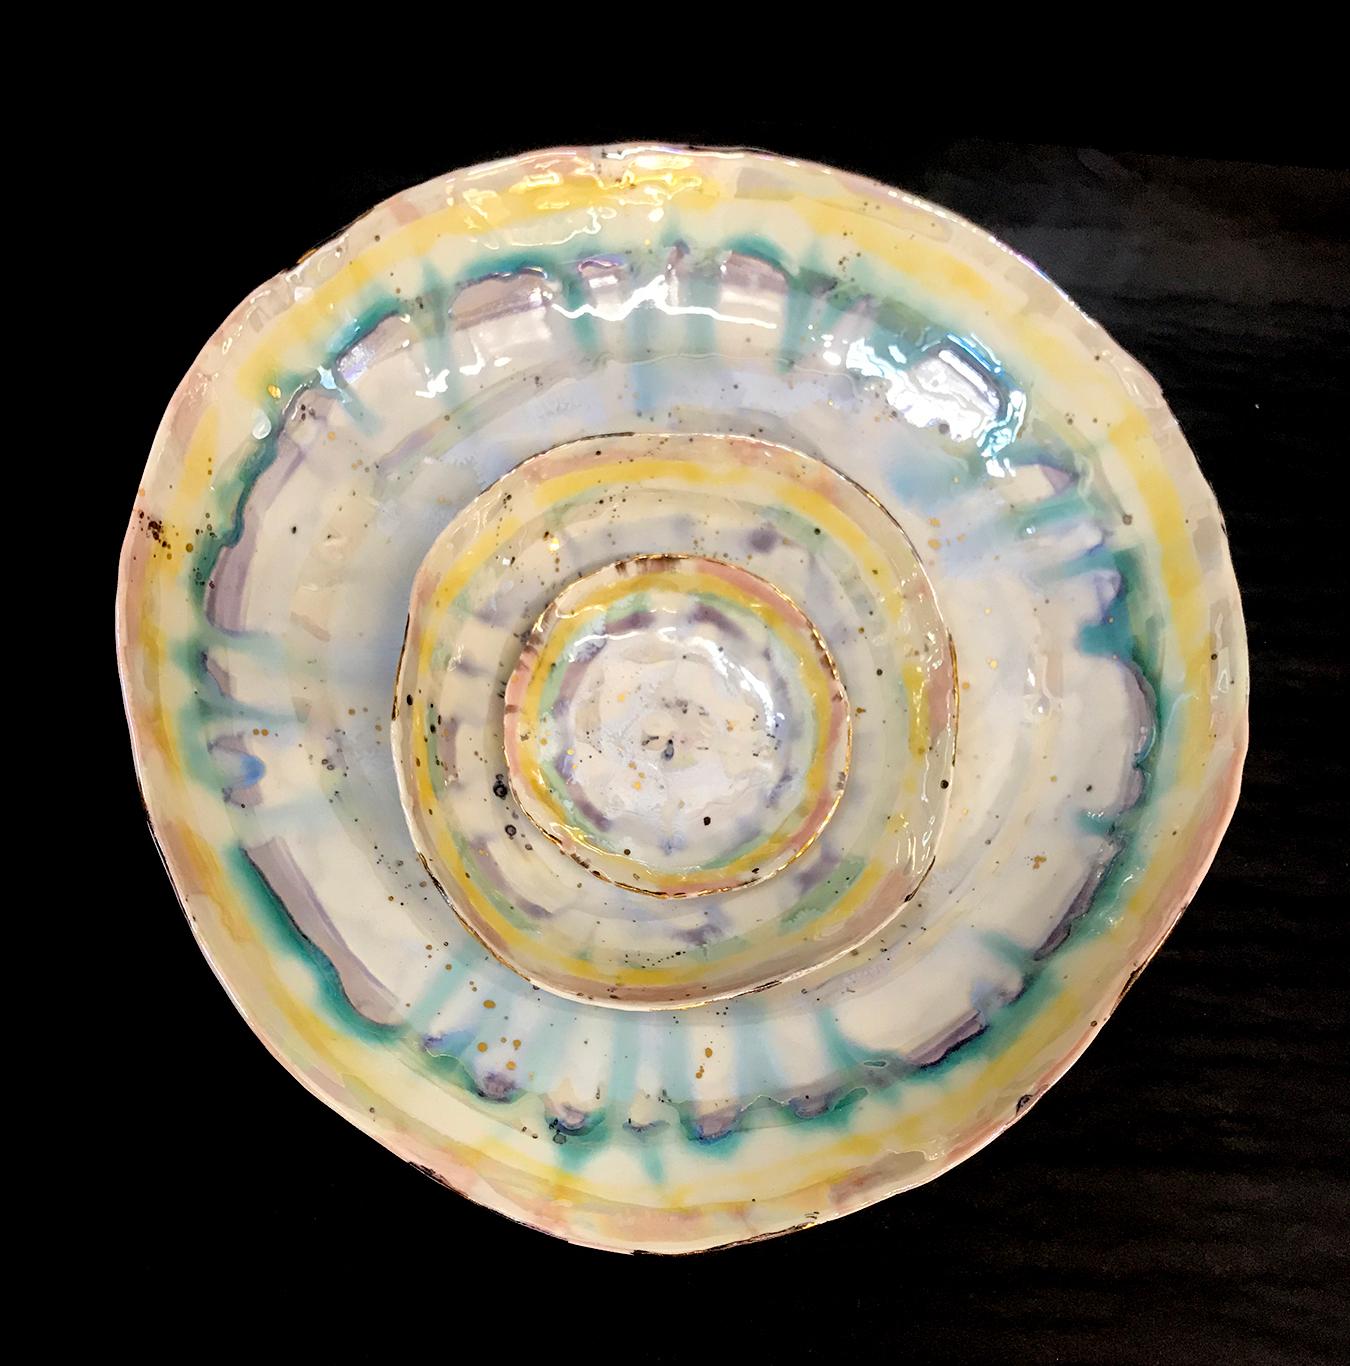 This set of three prism dishes by Minh Singer is hand-built in porcelain and intricately glazed with a rainbow of celadon glazes and 22-karat gold and mother-of-pearl lusters. Singer's mesmerizing glaze technique requires several firings.

Each